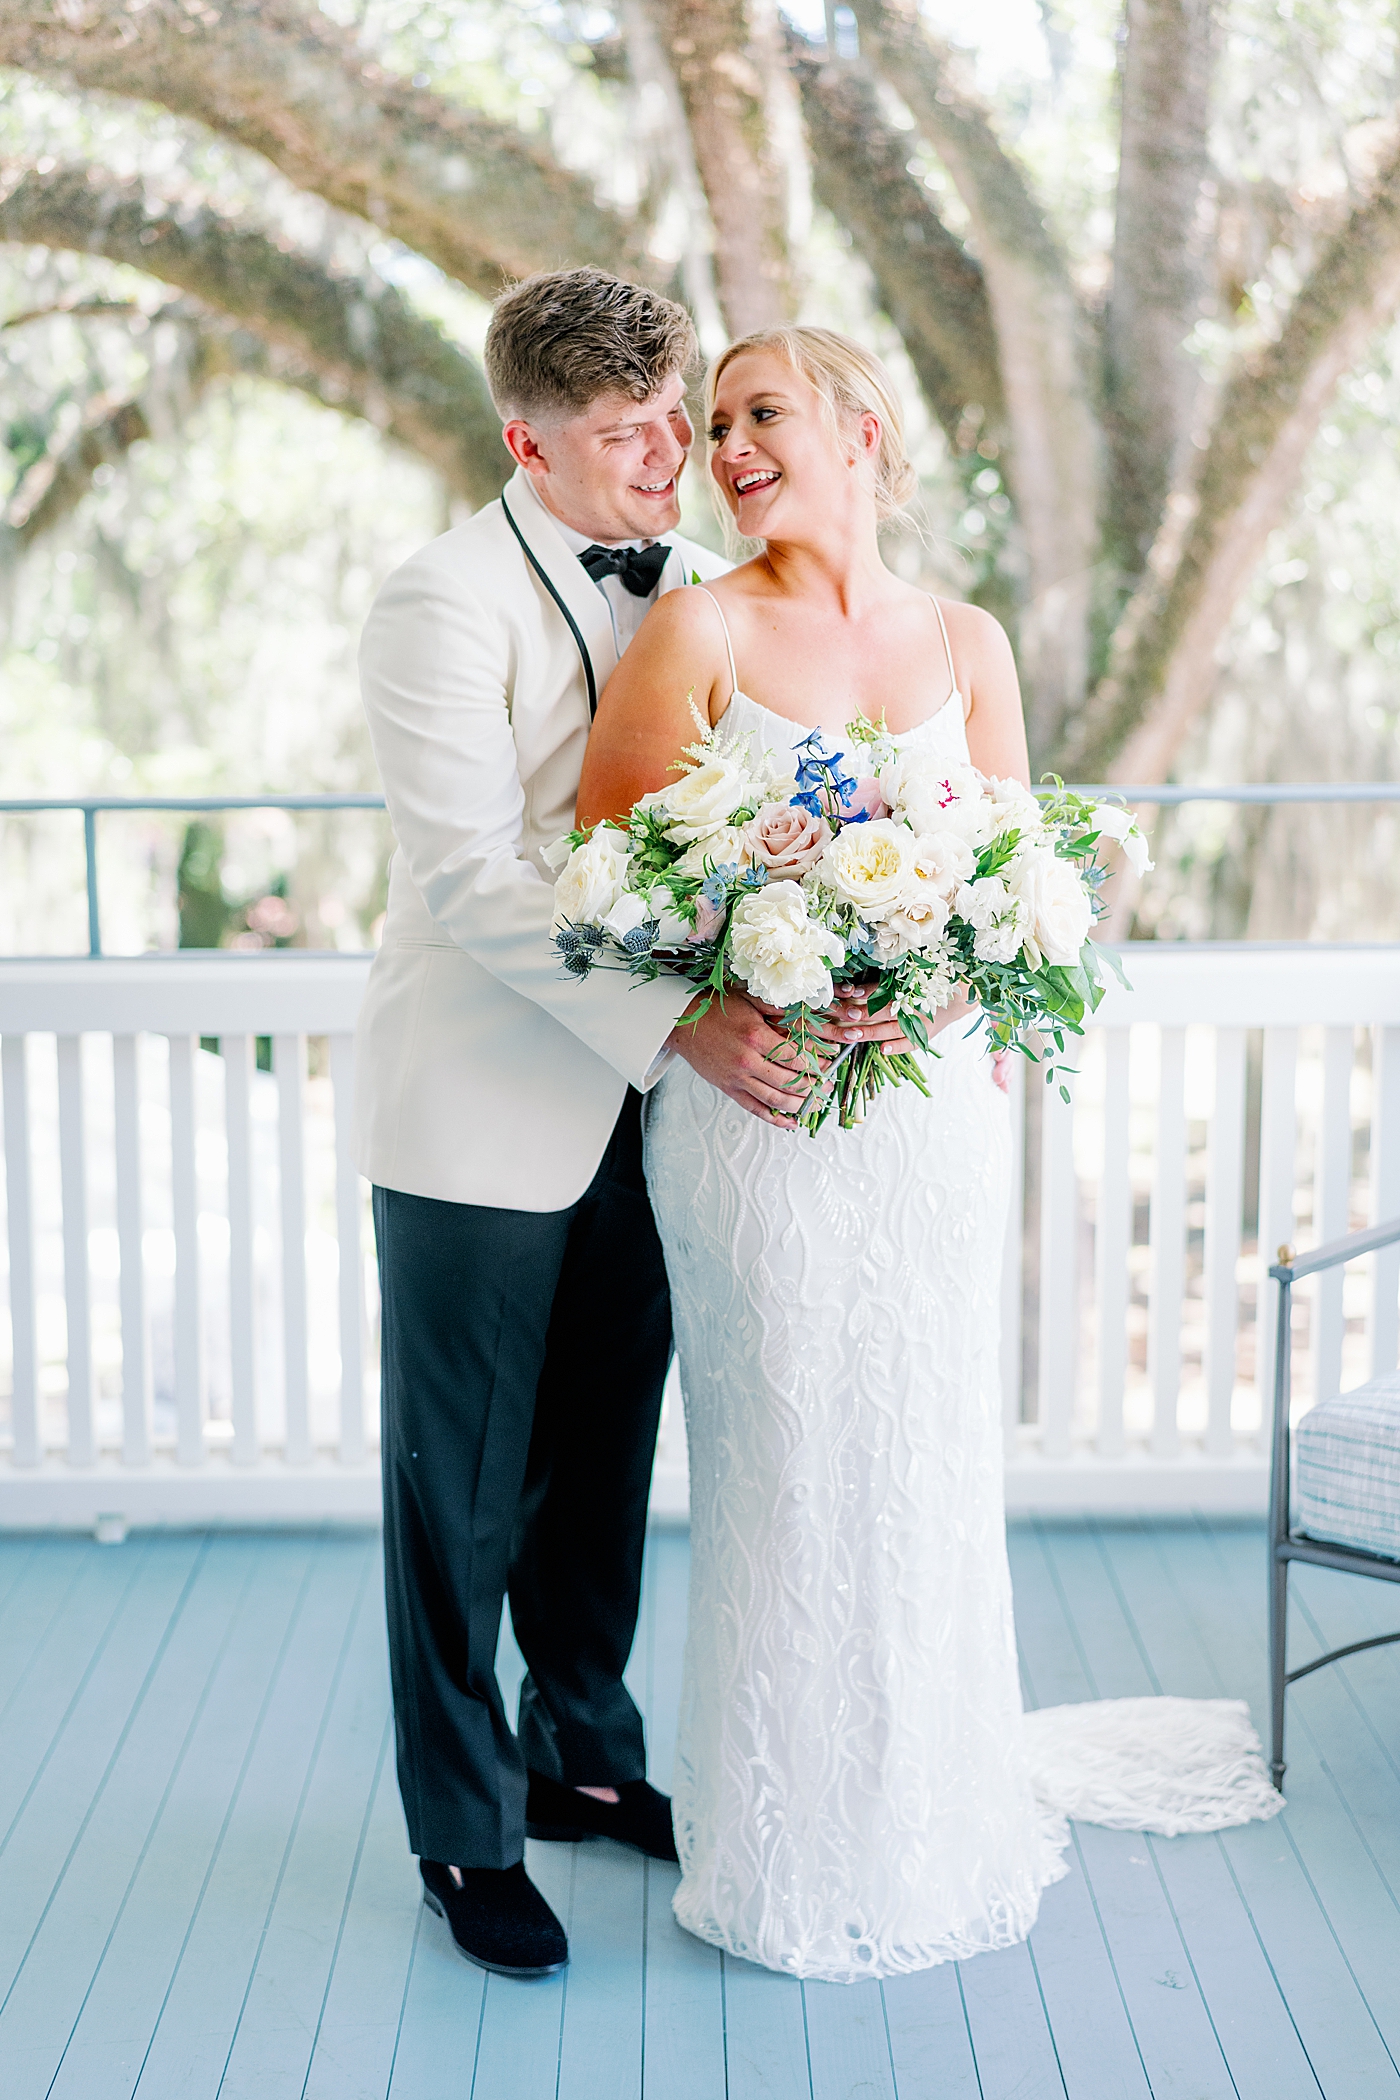 Bride and groom embracing on a balcony during their Elegant Grandmillenial Charleston Wedding | Images by Annie Laura Photography